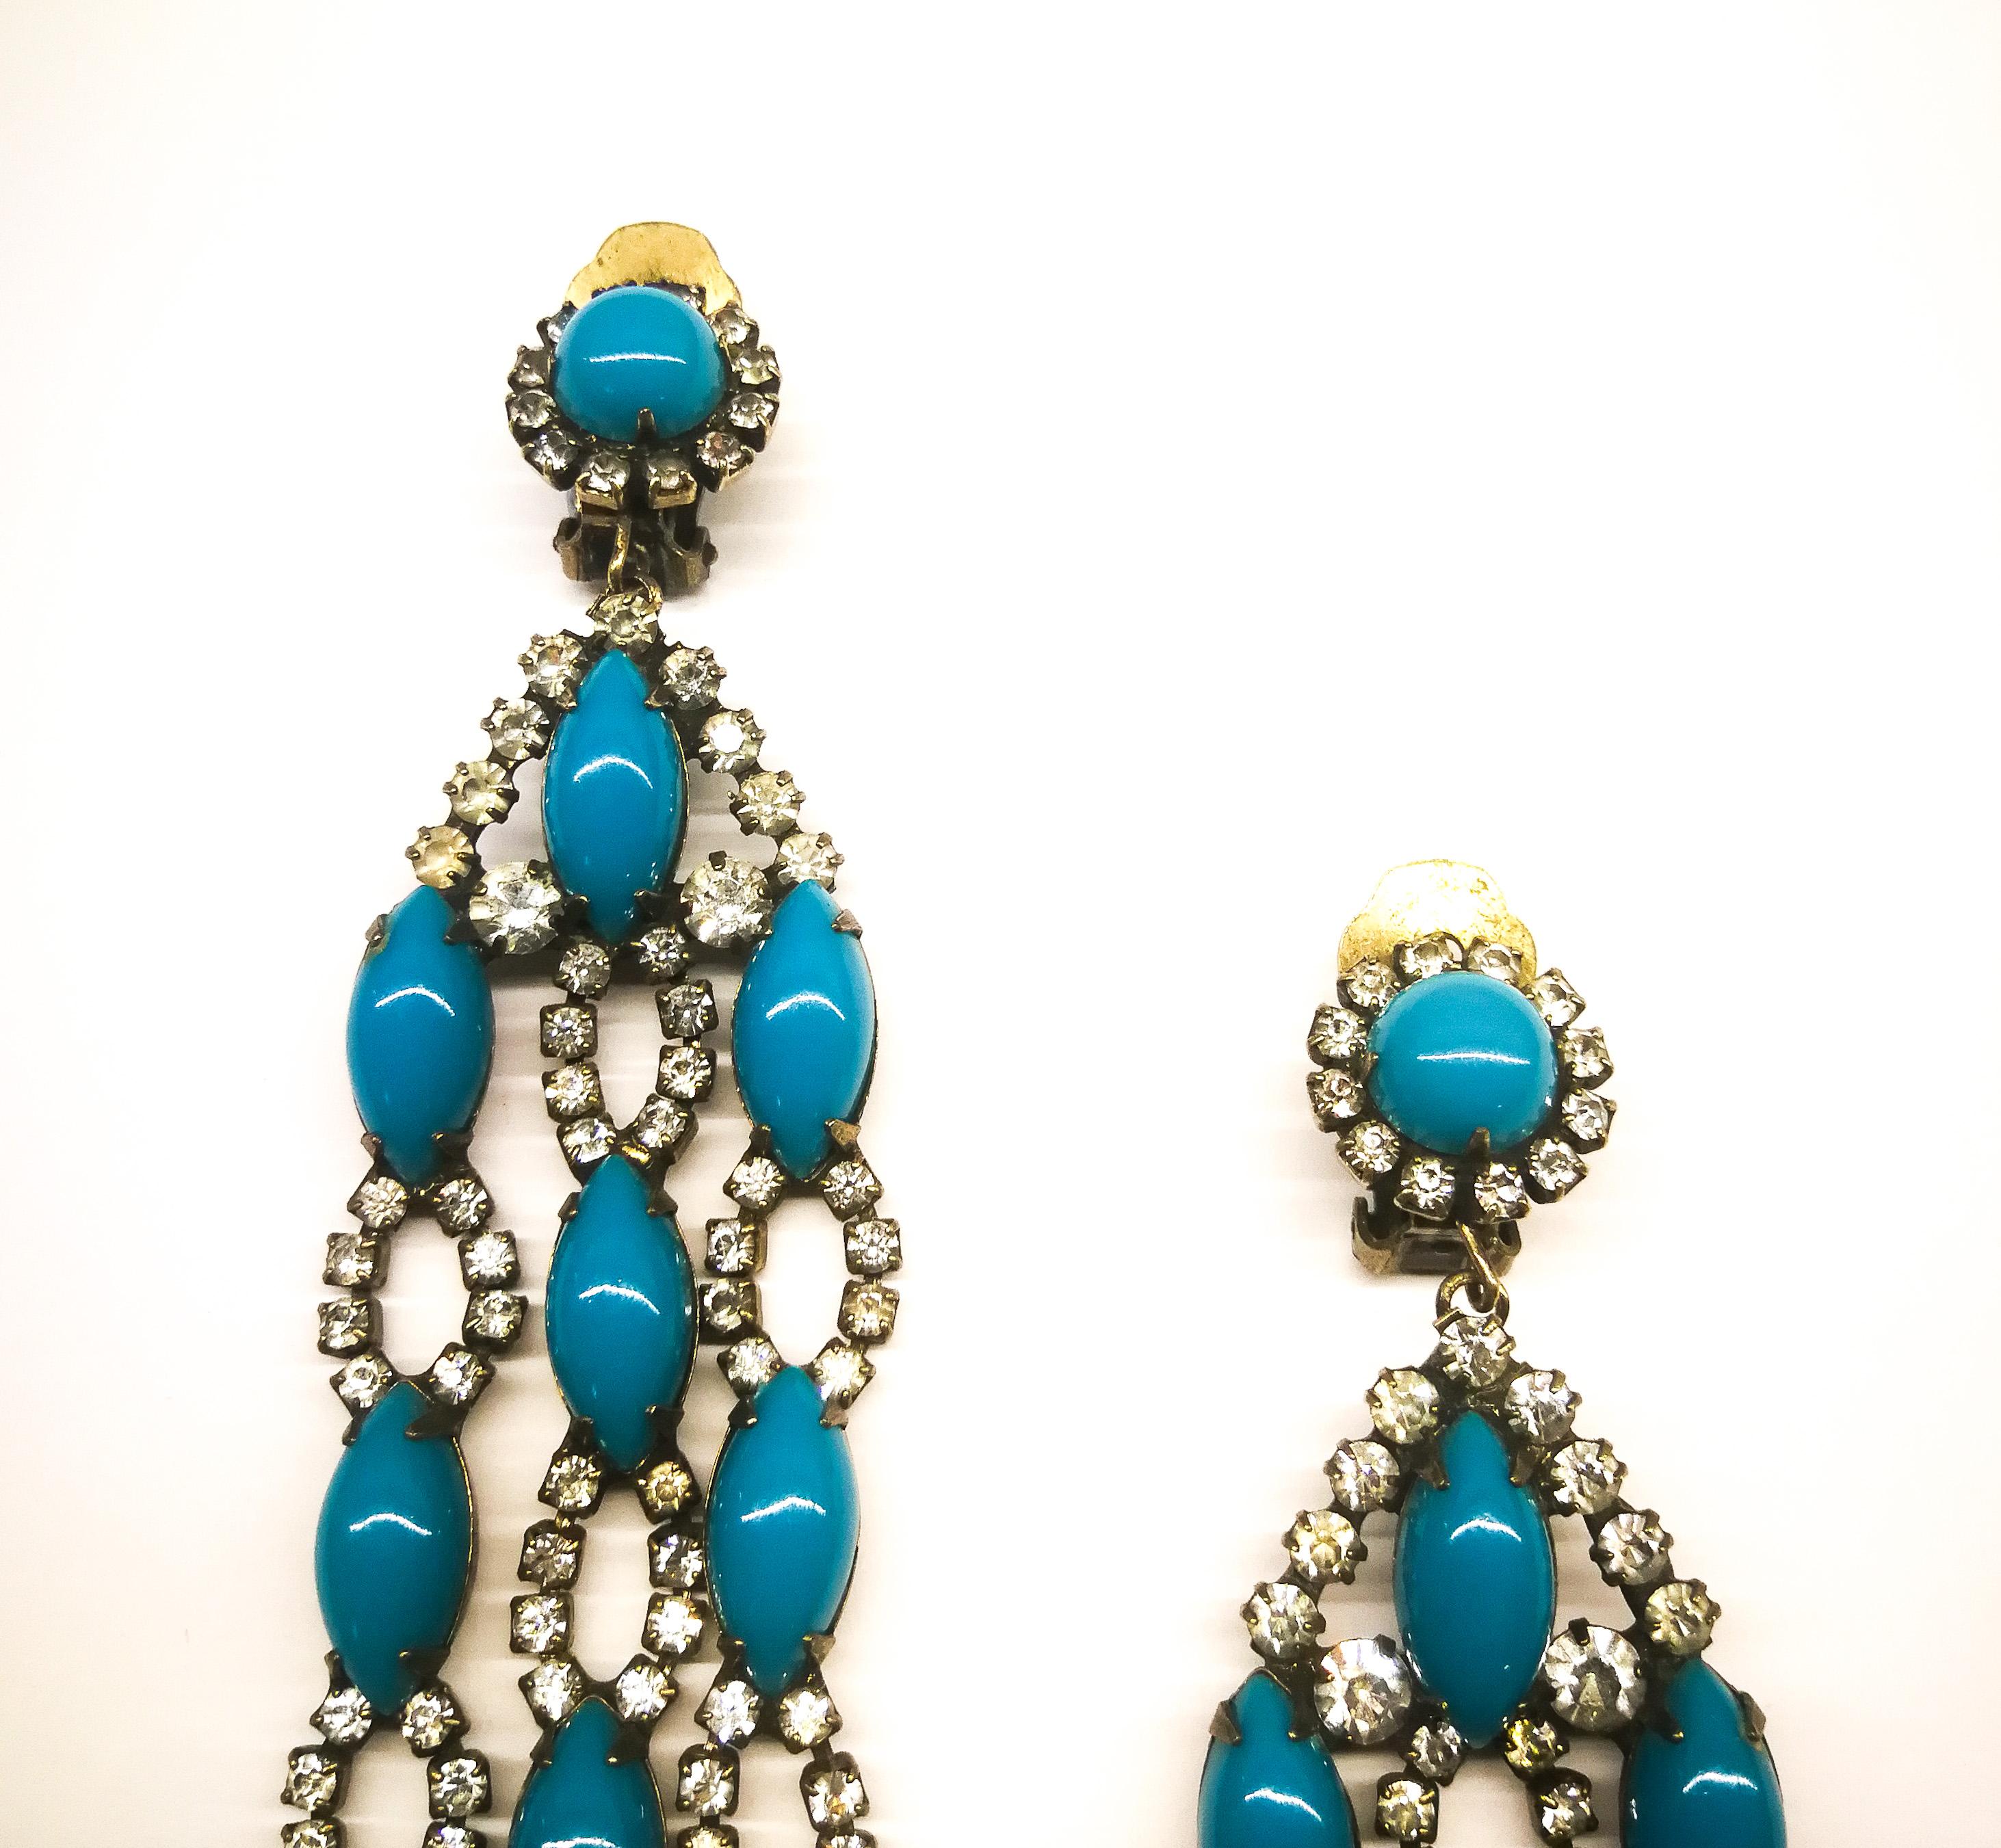 Spectacular and very glamorous three row drop earrings, with three articulated drop row of alternating turquoise glass cabuchons and clear pastes, made by Kenneth Jay Lane. These are a piece of 1960s glamour, chic and iconic, the earliest creations